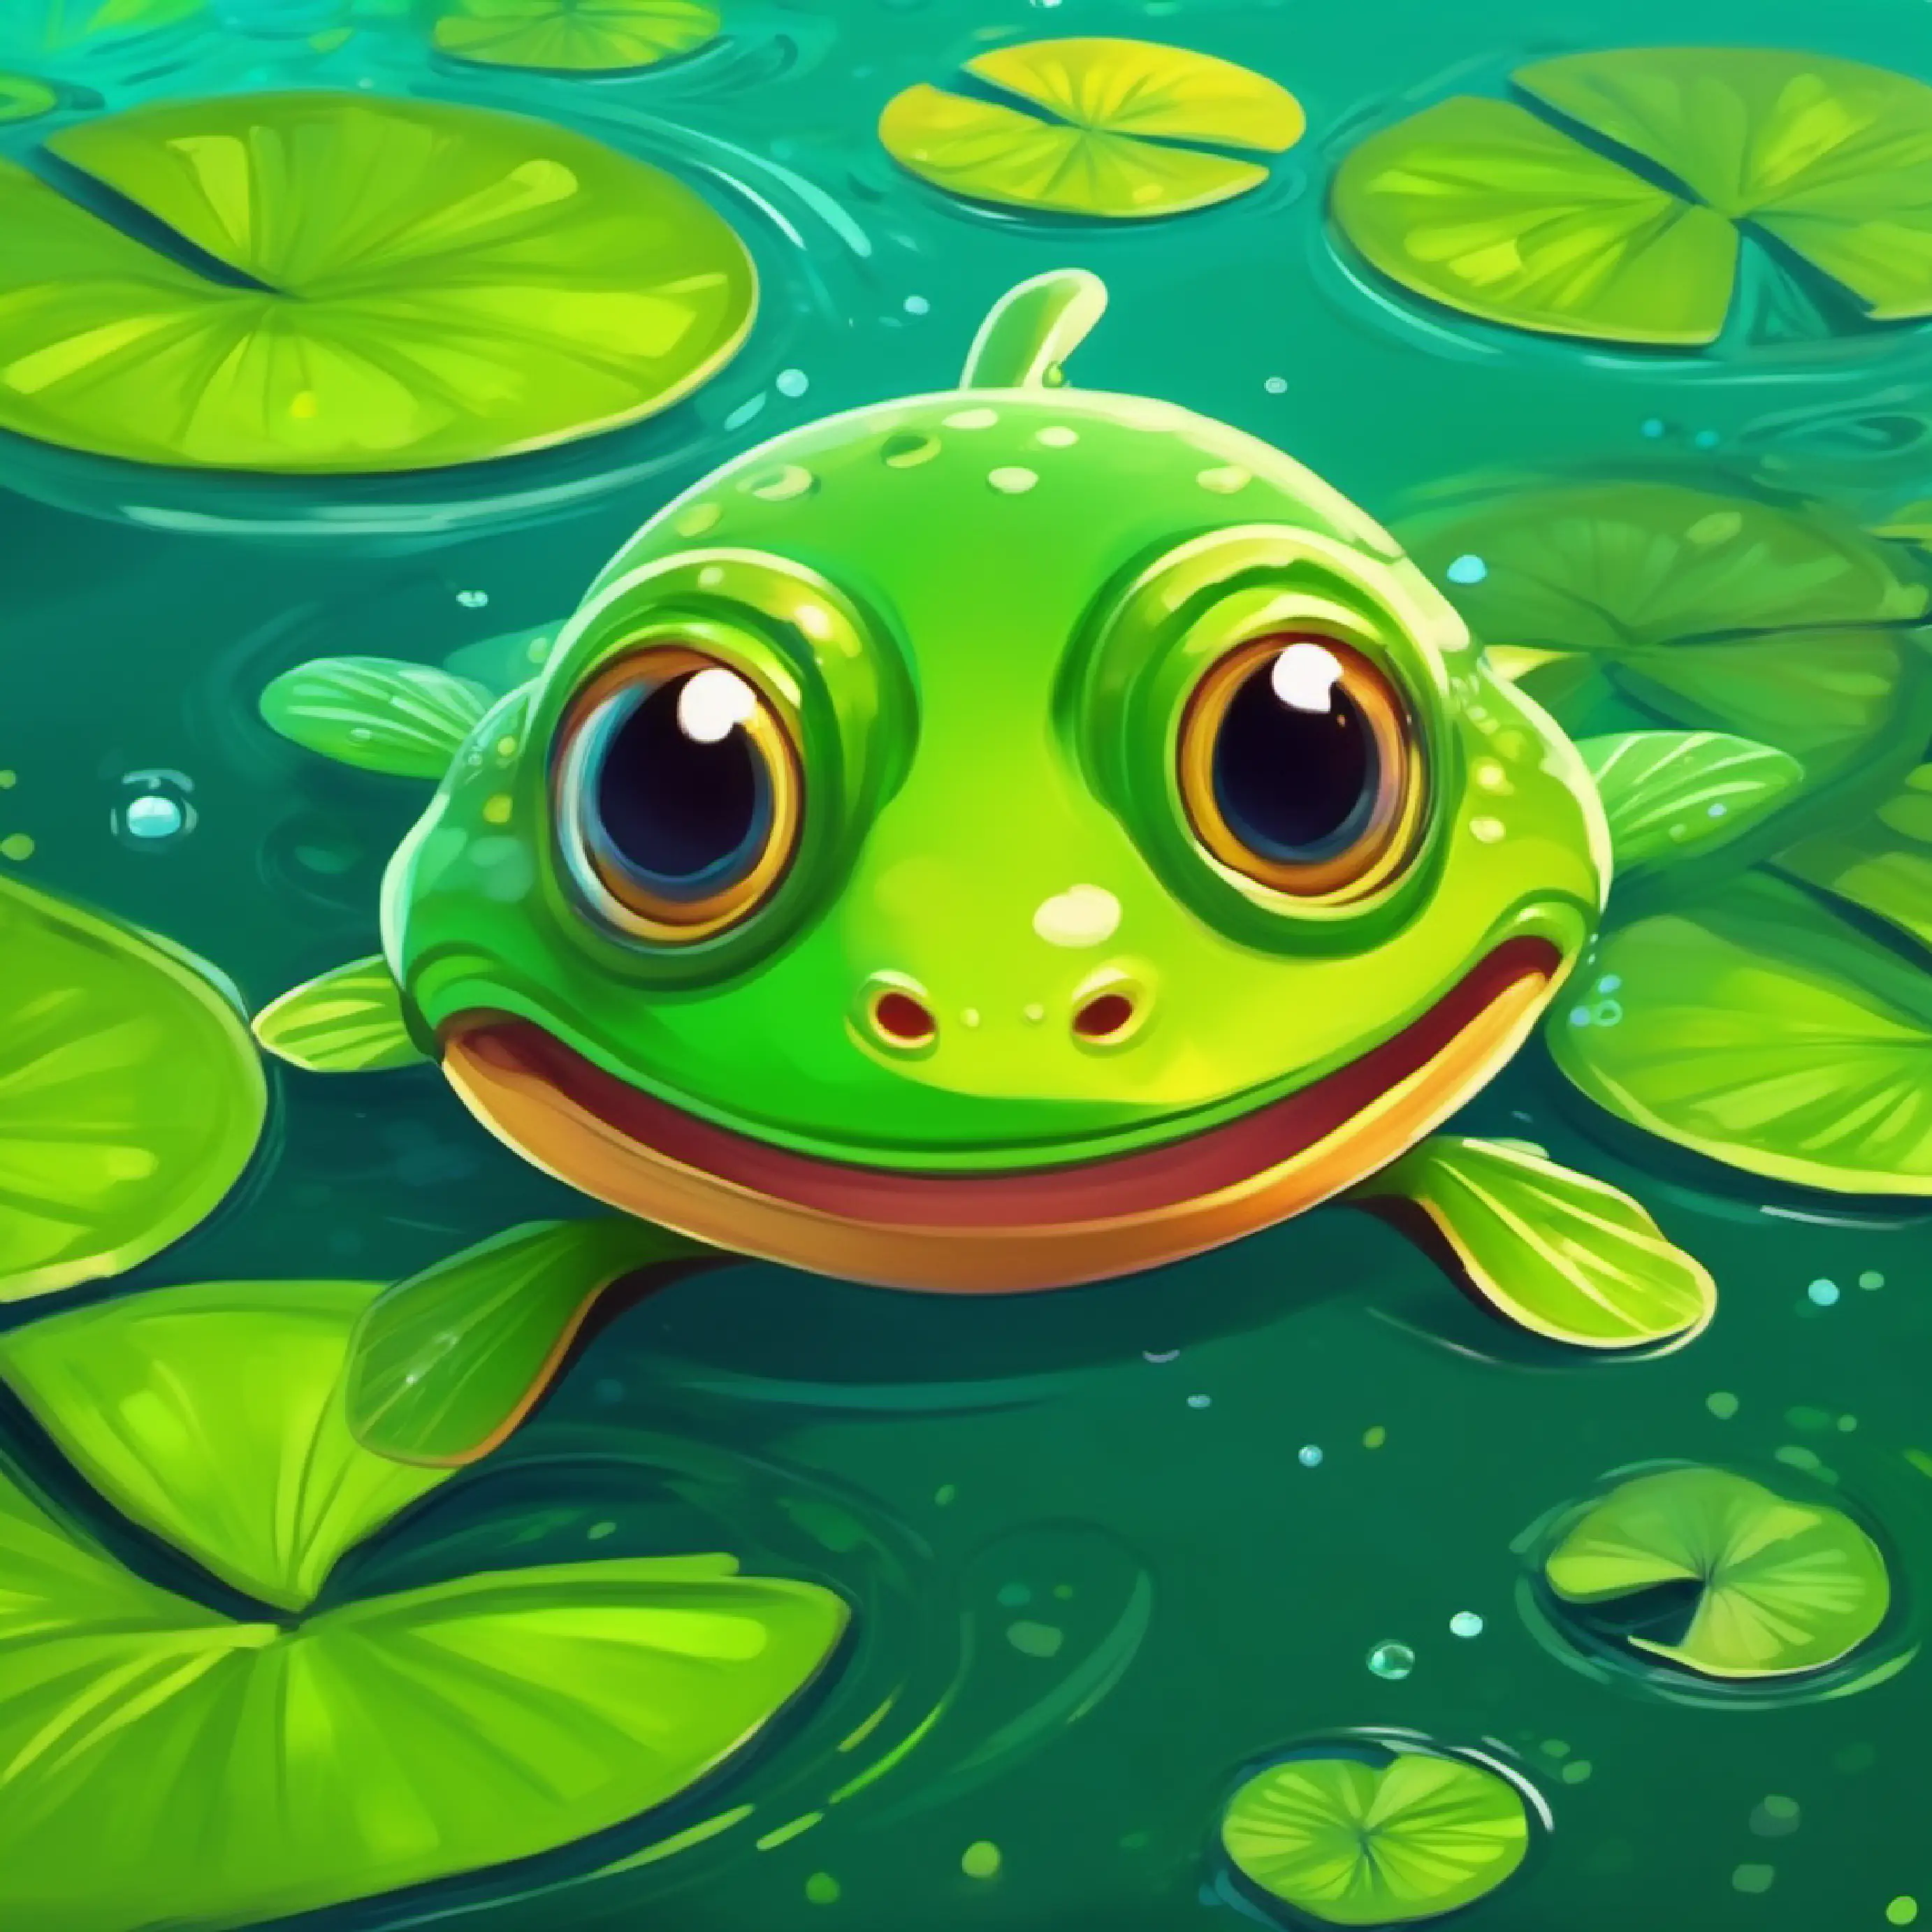 Tiny tadpole, vibrant green, curious eyes, eager to explore exploring the pond, using his tail to swim.